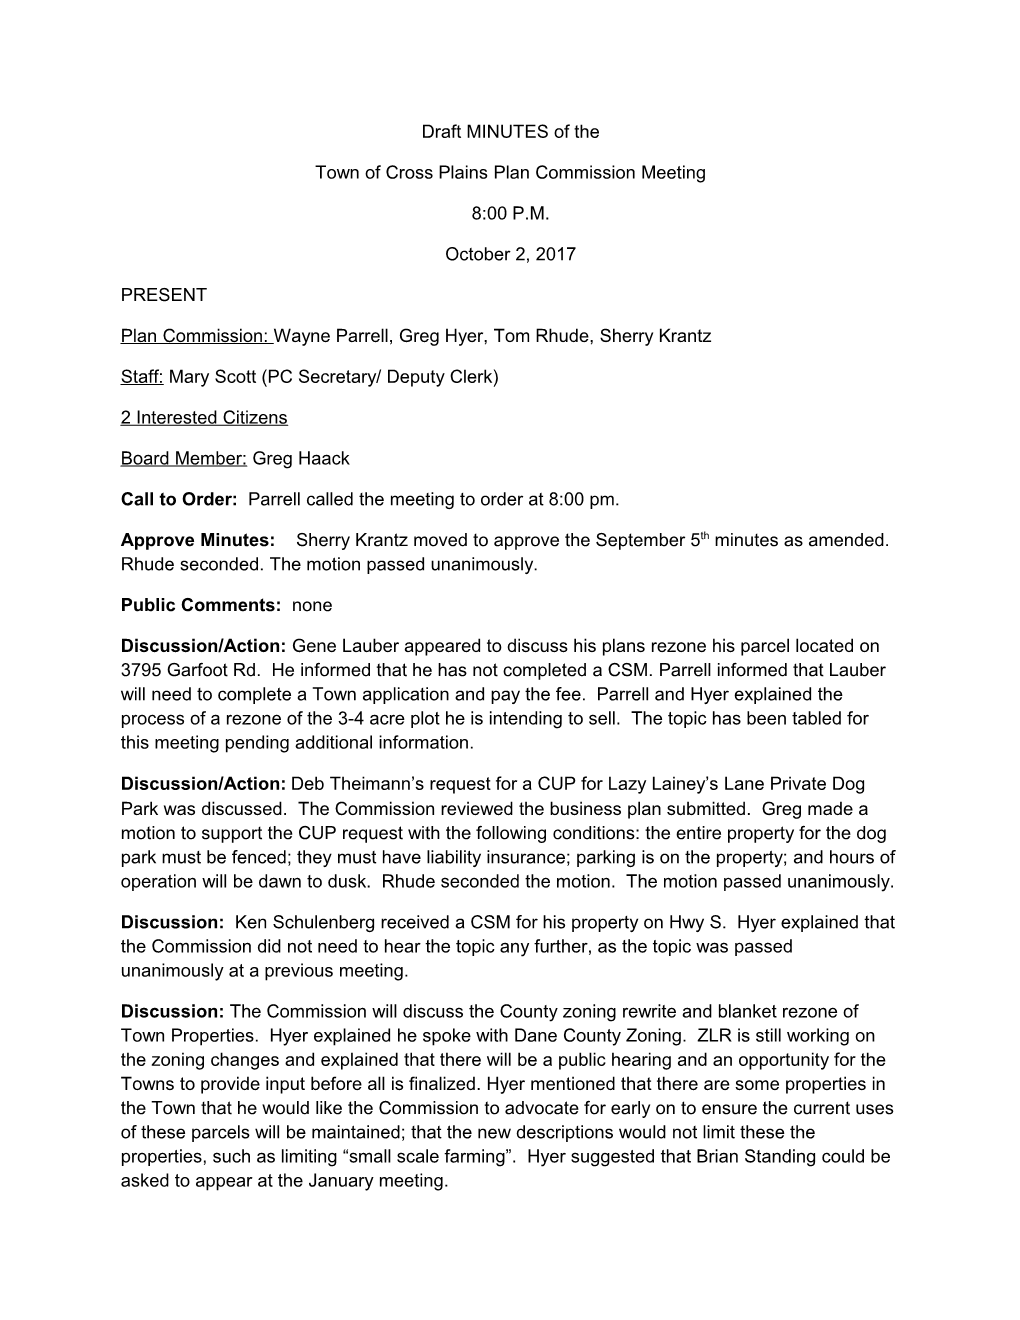 Town of Cross Plains Plan Commission Meeting